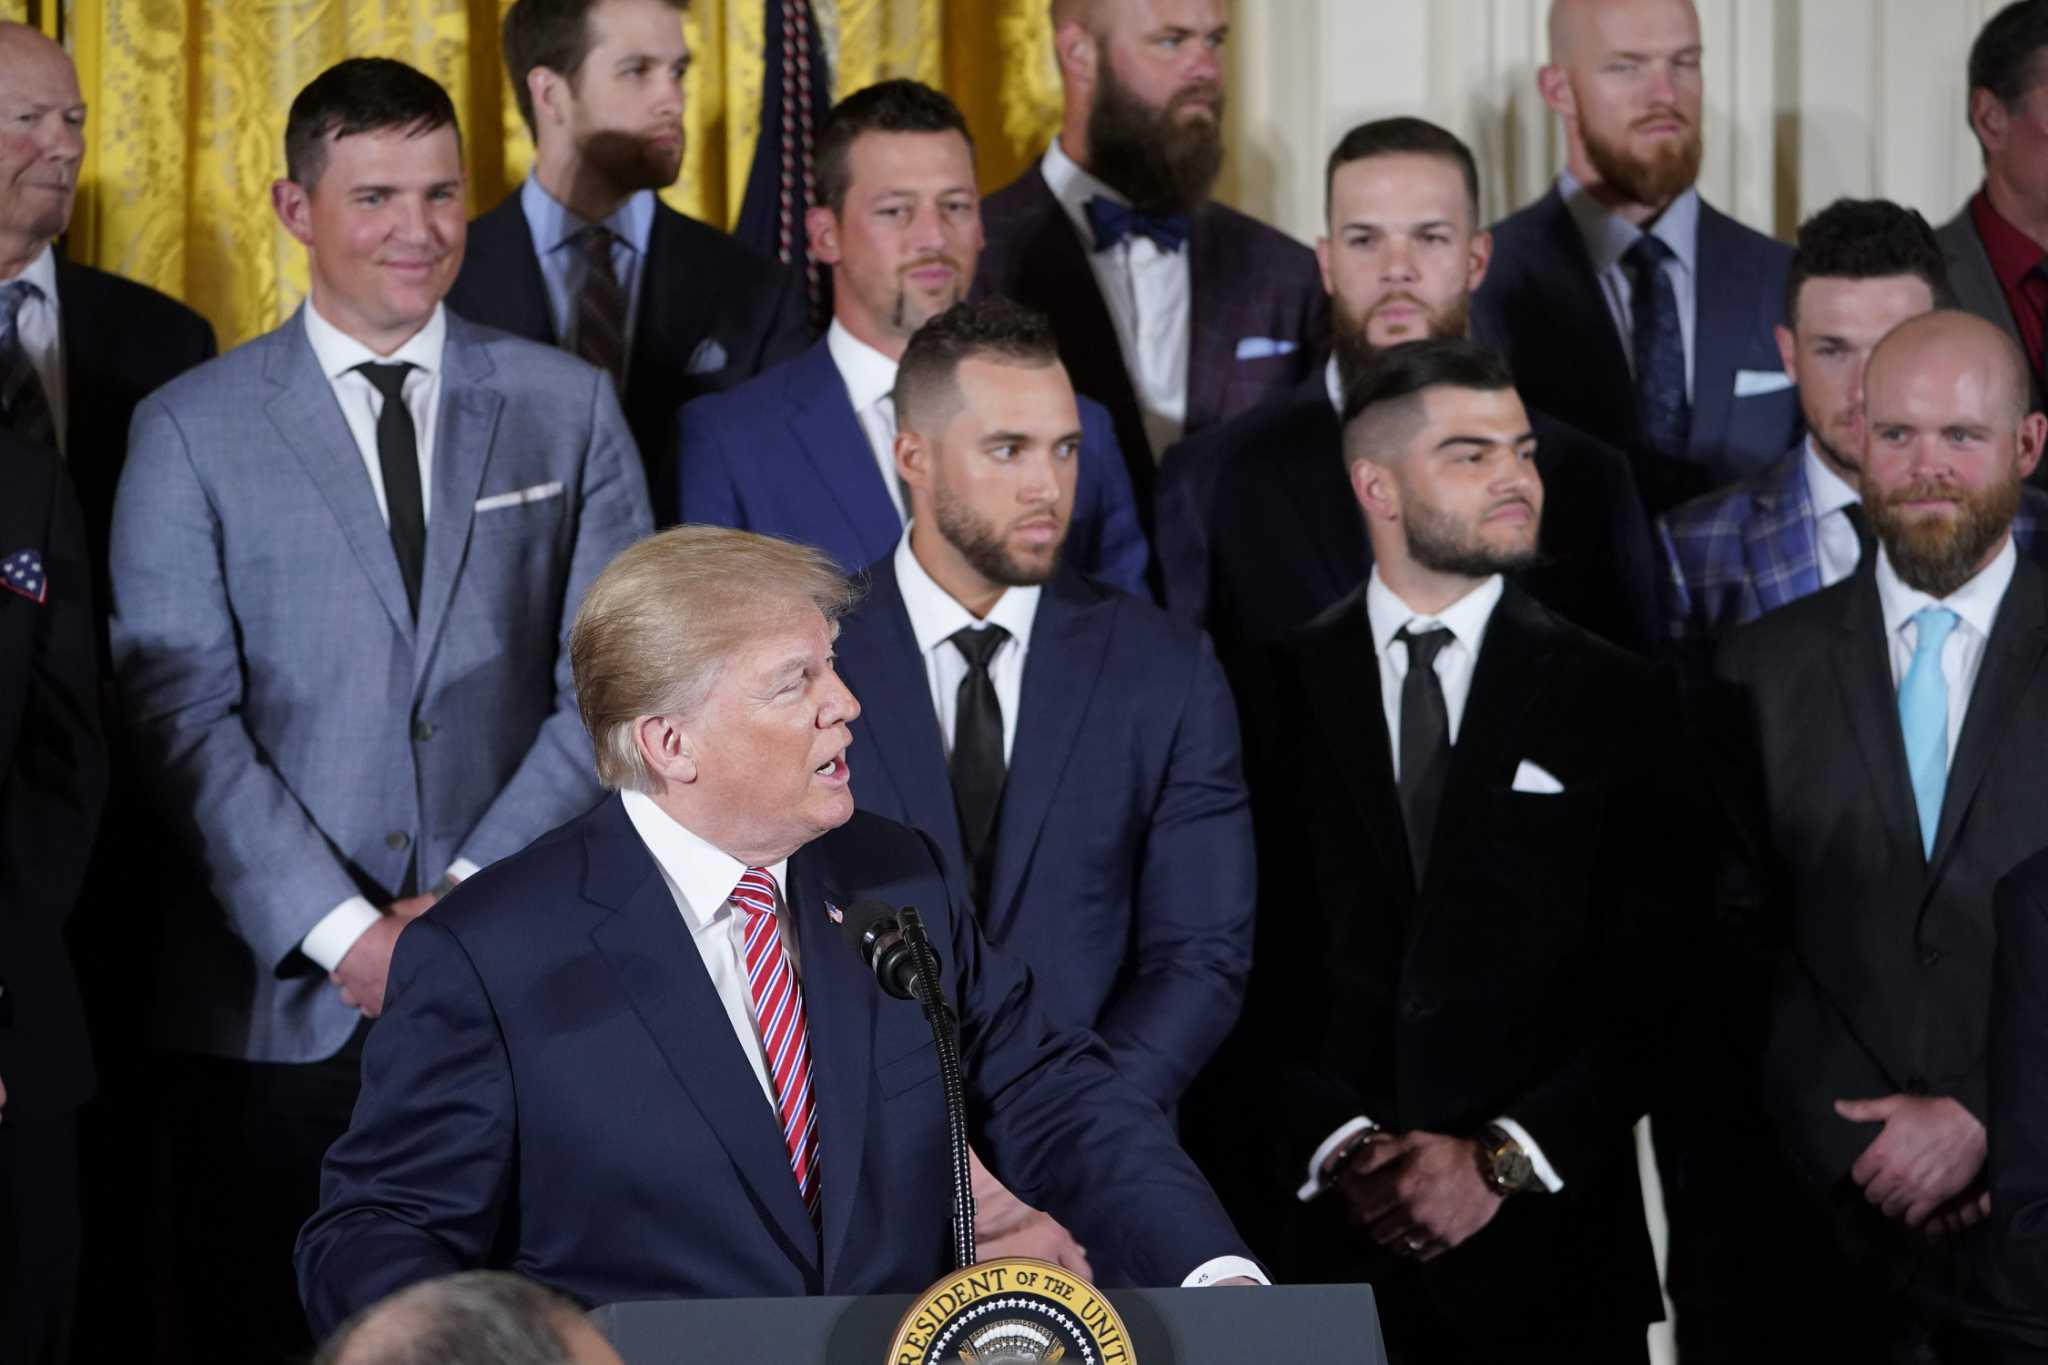 Watch video of the Astros' visit to the White House